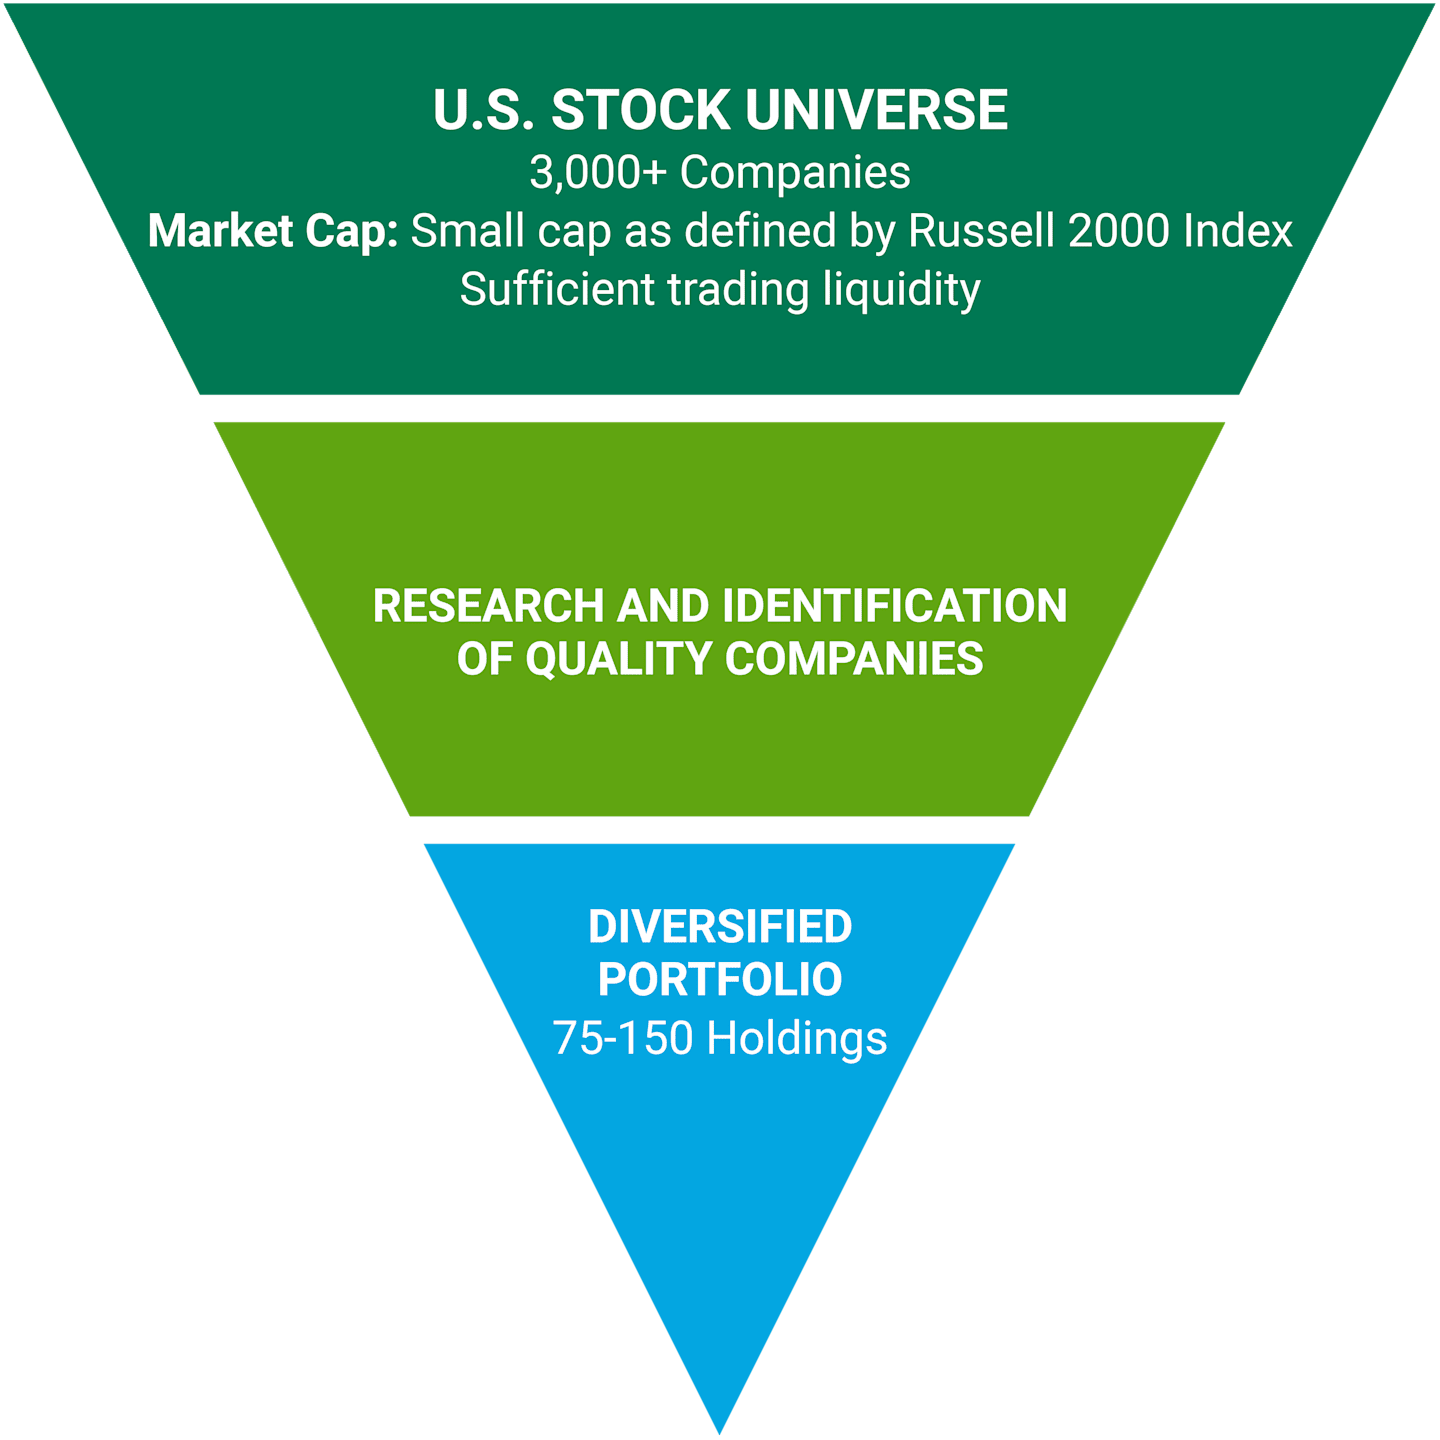 U.S. Stock Universe: 3,000+ companies, market cap: small cap as defined by Russell 2000 Index, sufficient trading liquidity. Research and identification of quality companies. Diversified portfolio: 75 - 150 holdings. 